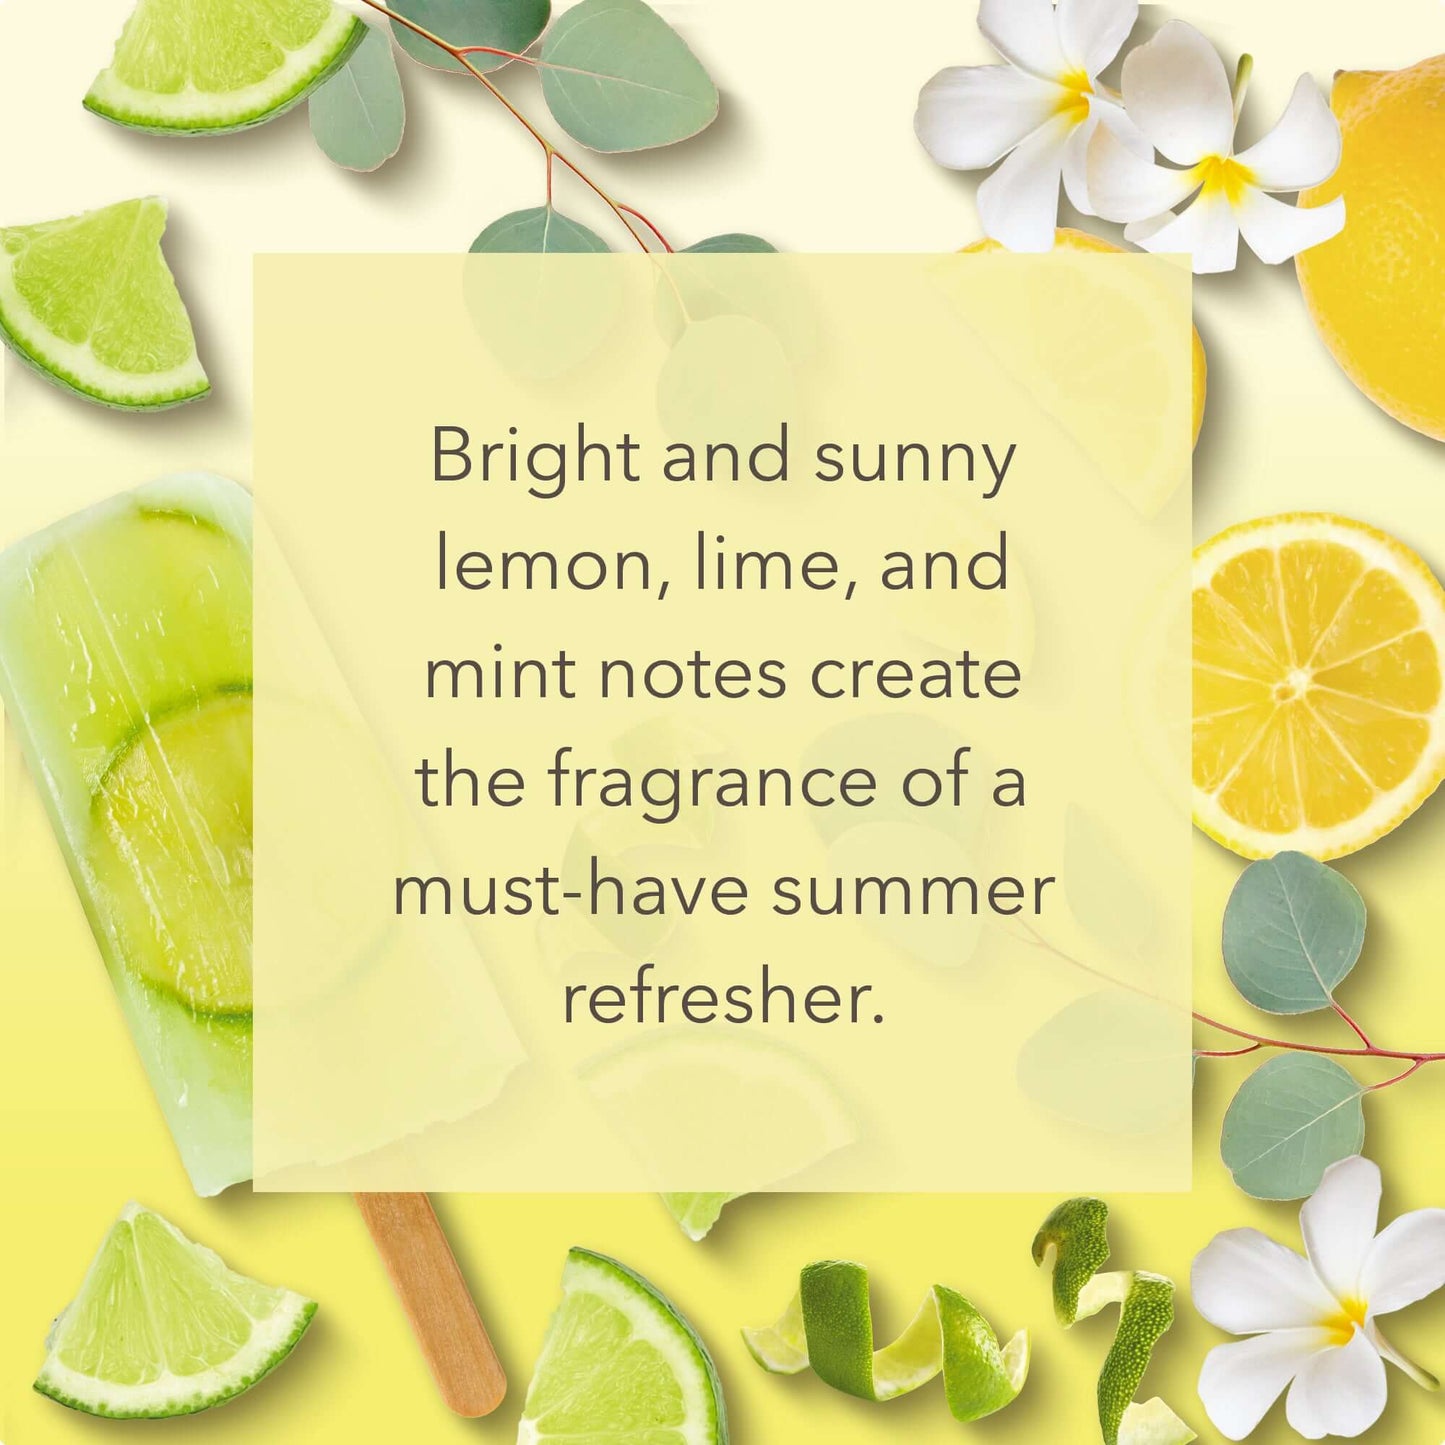 Lemon-Lime Popsicle Small Jar Bright and sunny lemon, lime, and mint notes create the fragrance of a must-have summer refresher. 